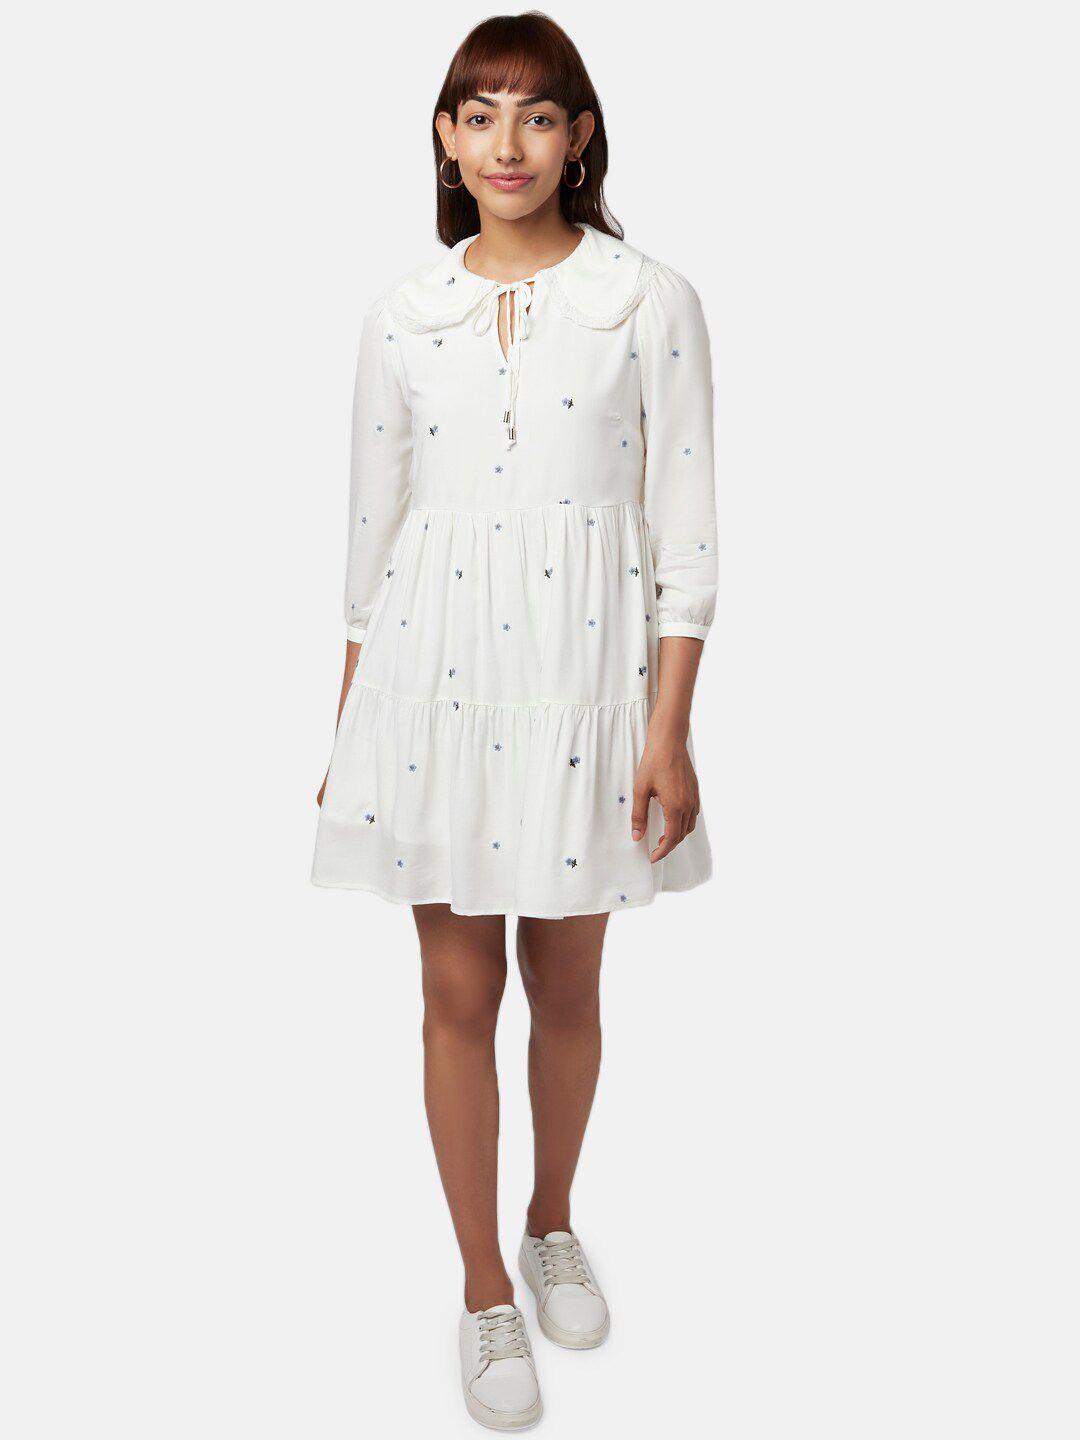 honey by pantaloons off white floral tie-up neck dress